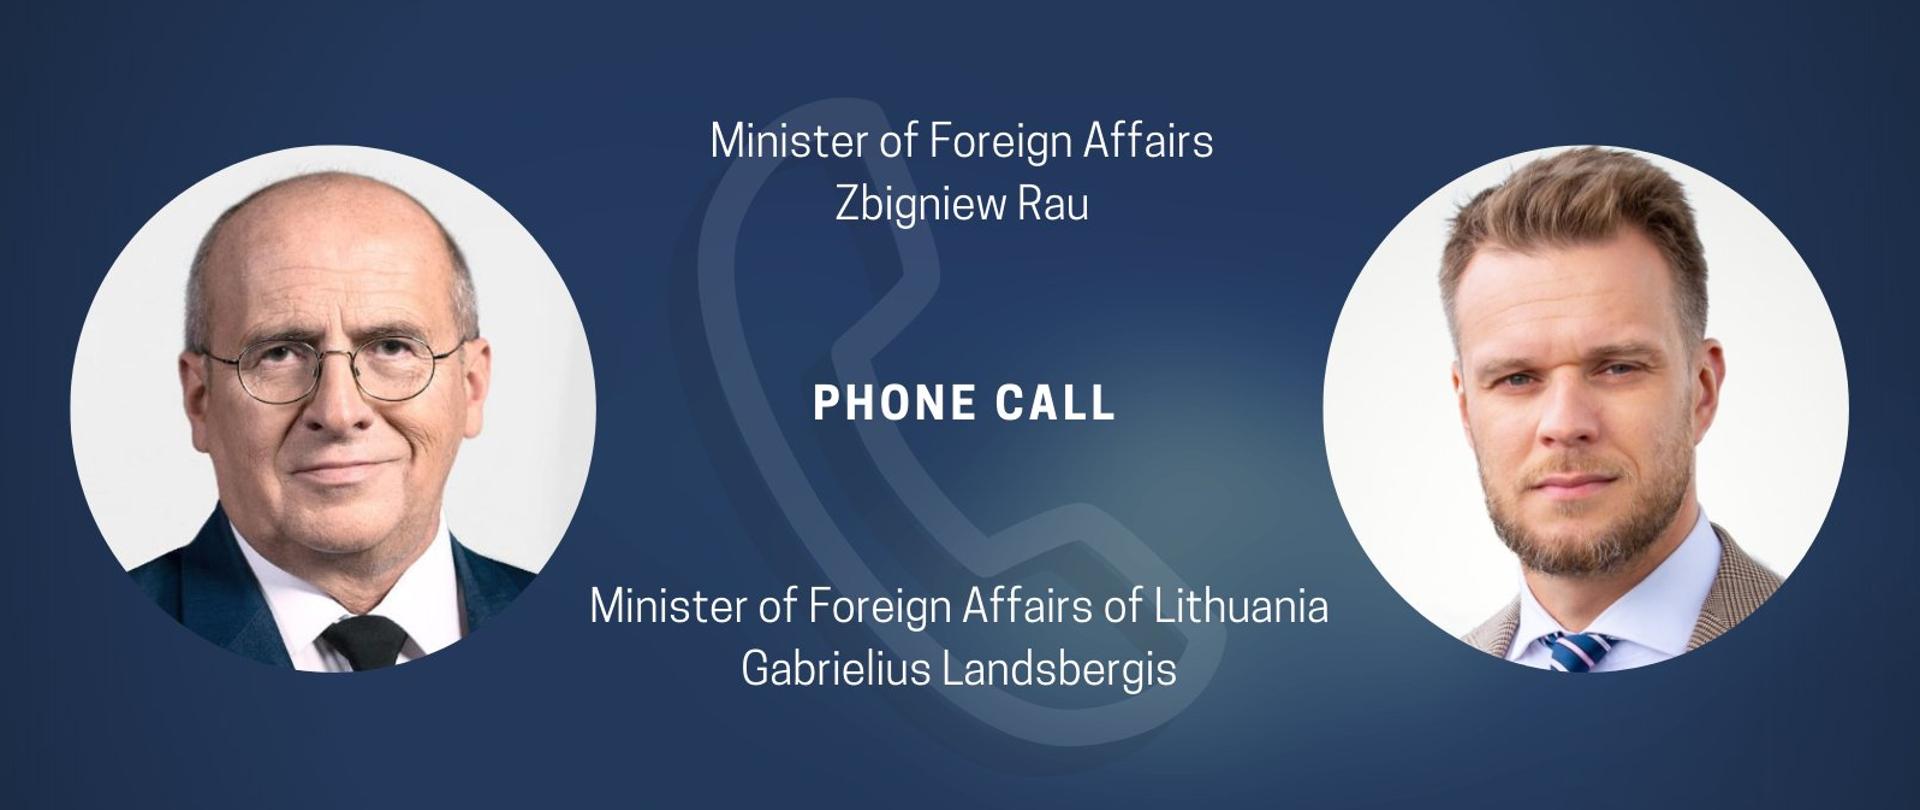 Minister Zbigniew Rau holds talks with Lithuania’s Foreign Minister Gabrielius Landsbergis